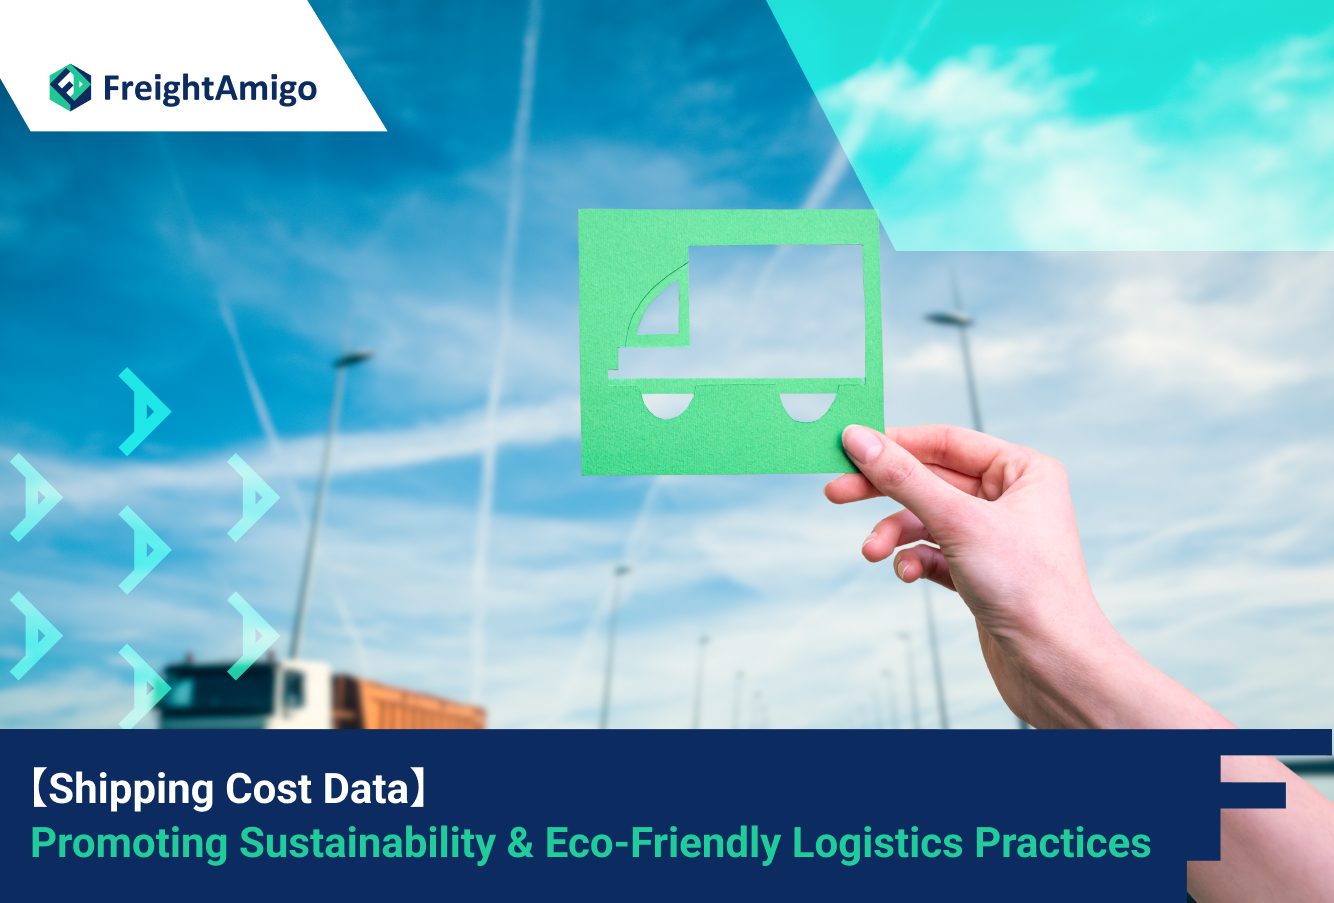 Promoting Sustainability & Eco-Friendly Logistics Practices